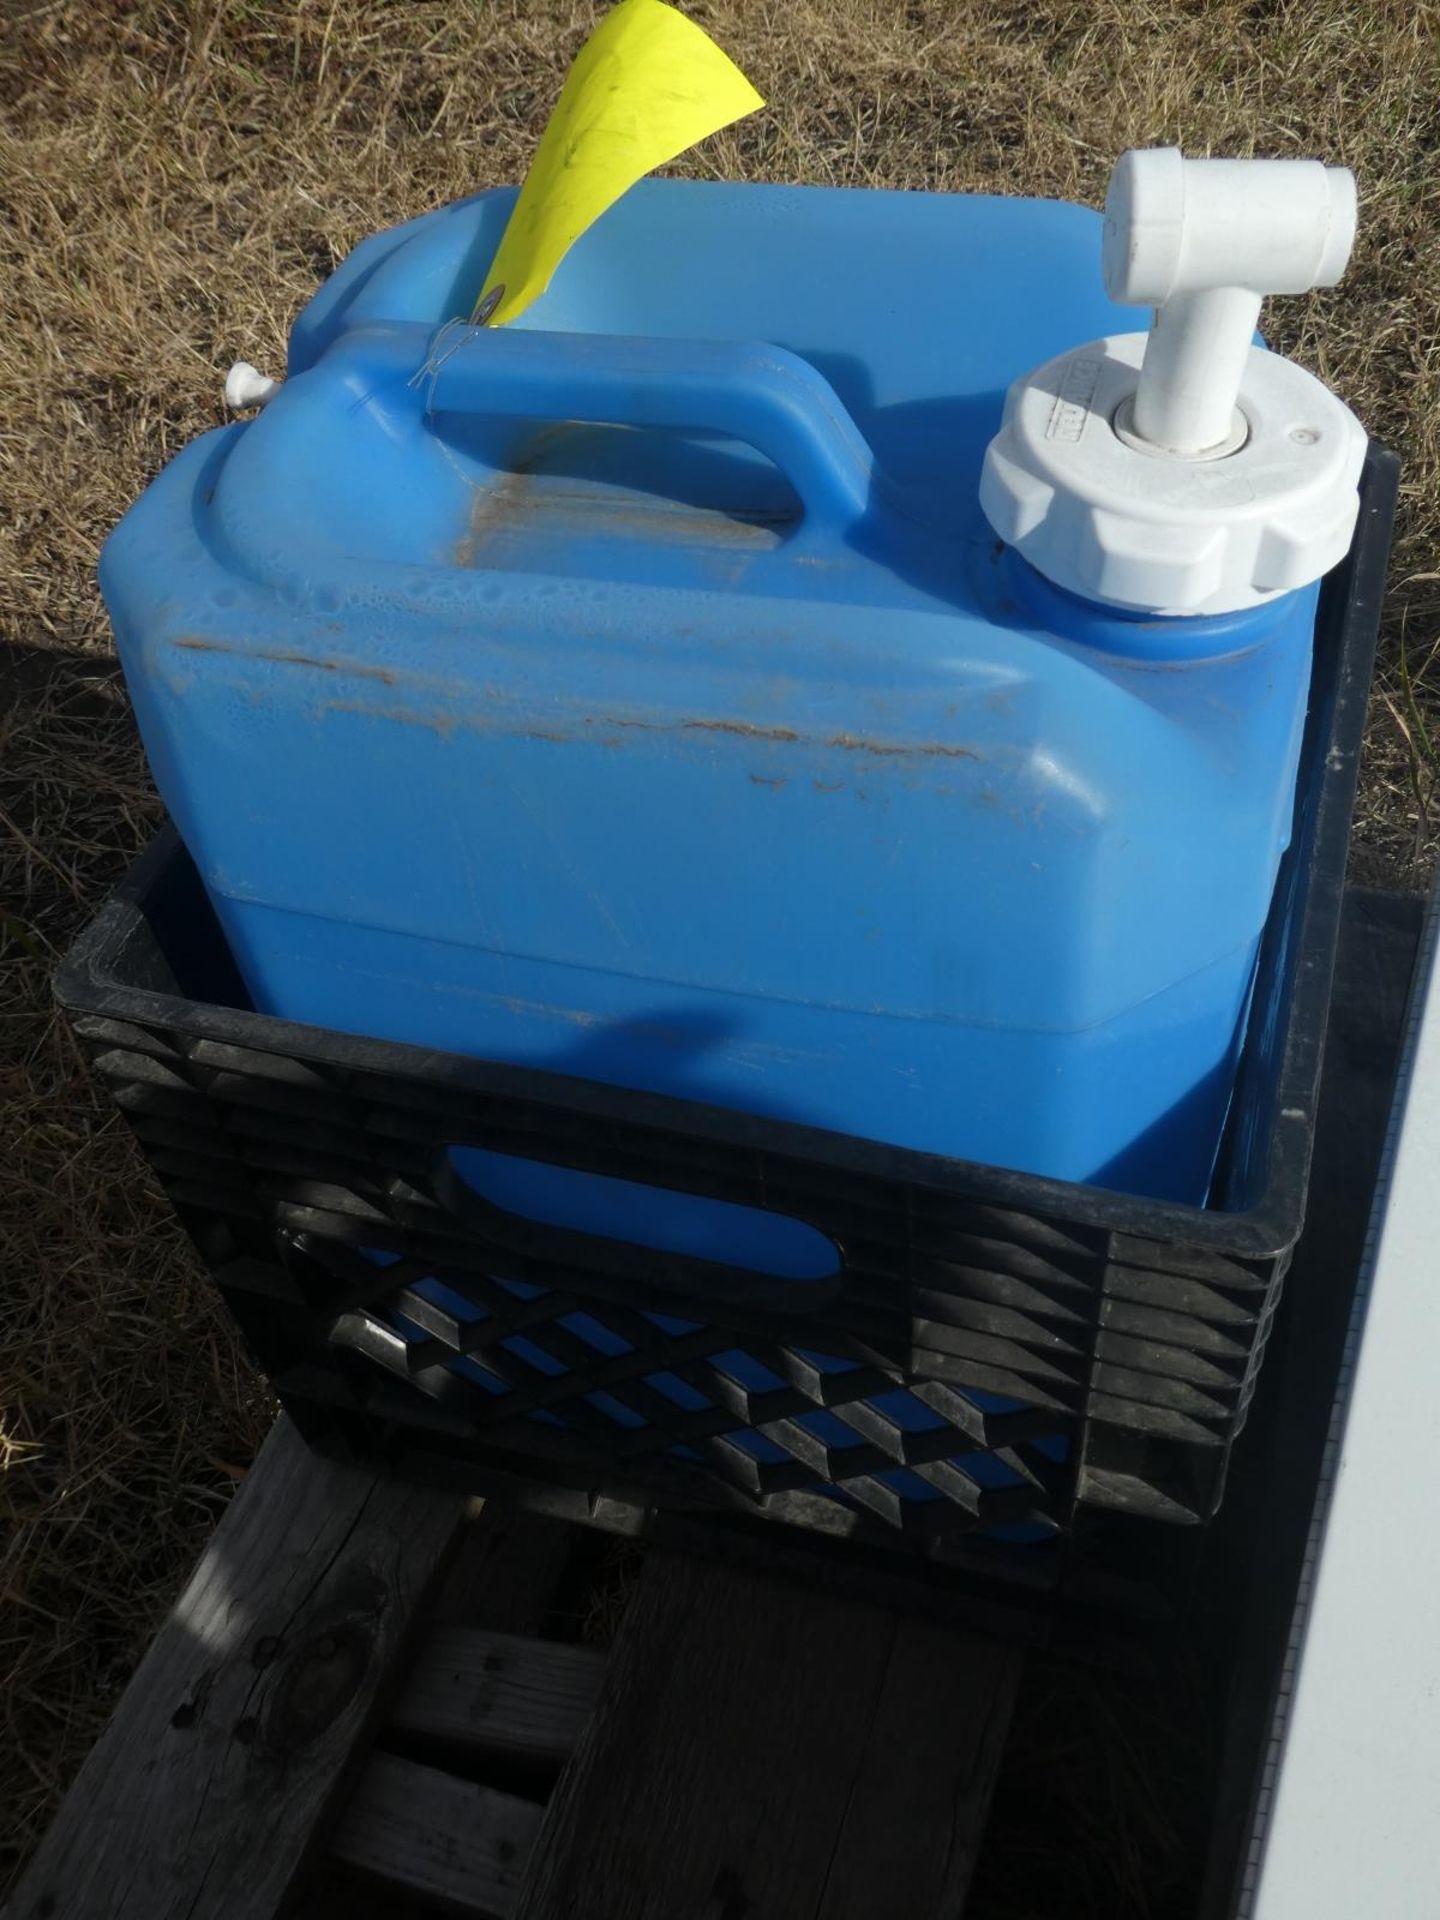 FIRST AID KIT AND PLOY WATER DISPENSING JUG - Image 2 of 3